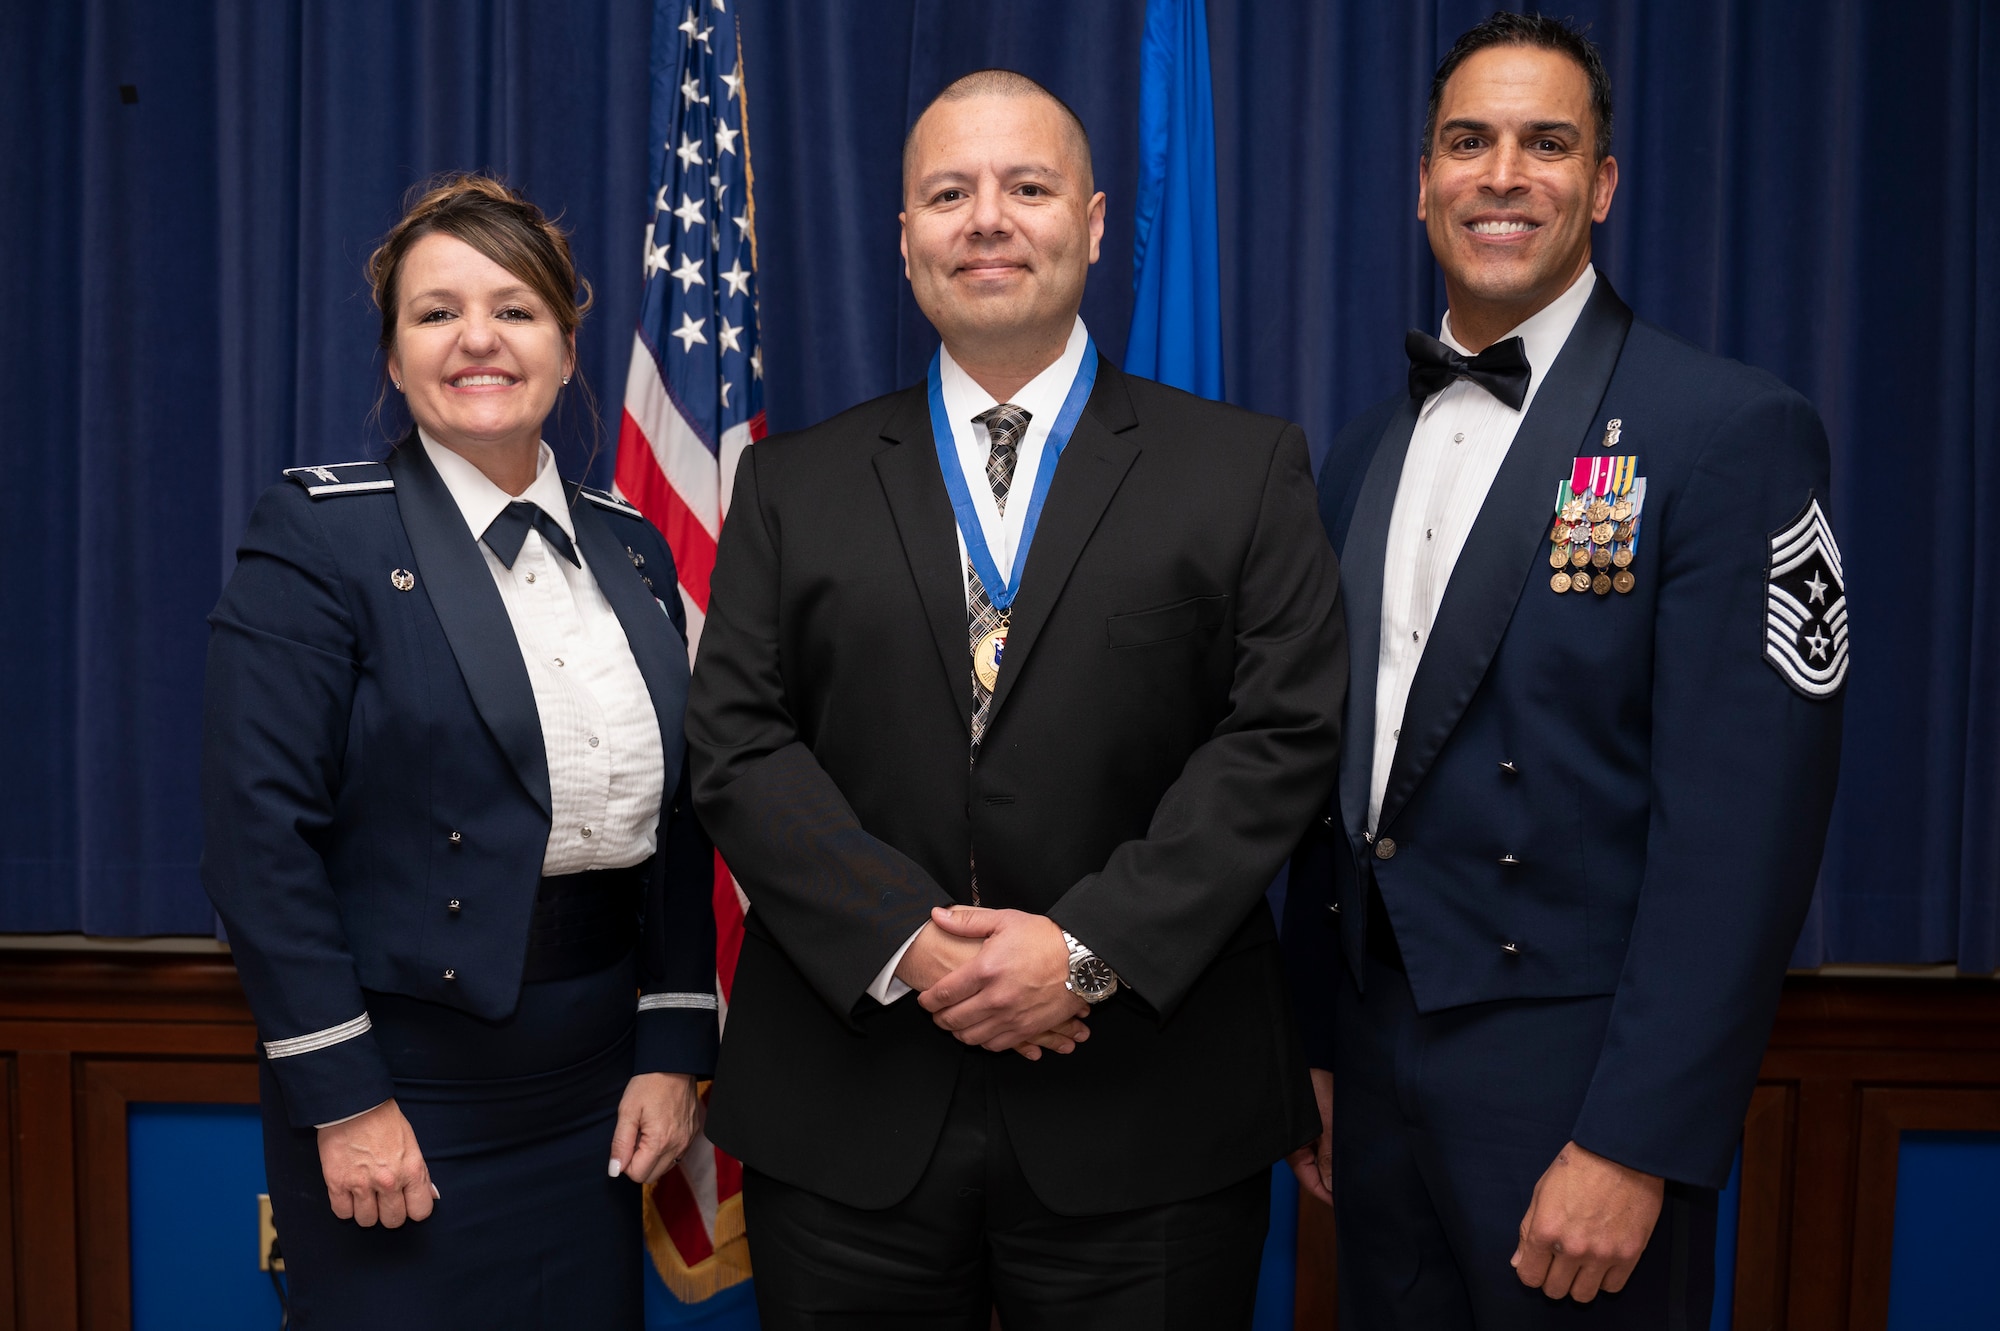 Three people pose for a photo in dress blues and business attire. the Center member is wearing an honorary medal.